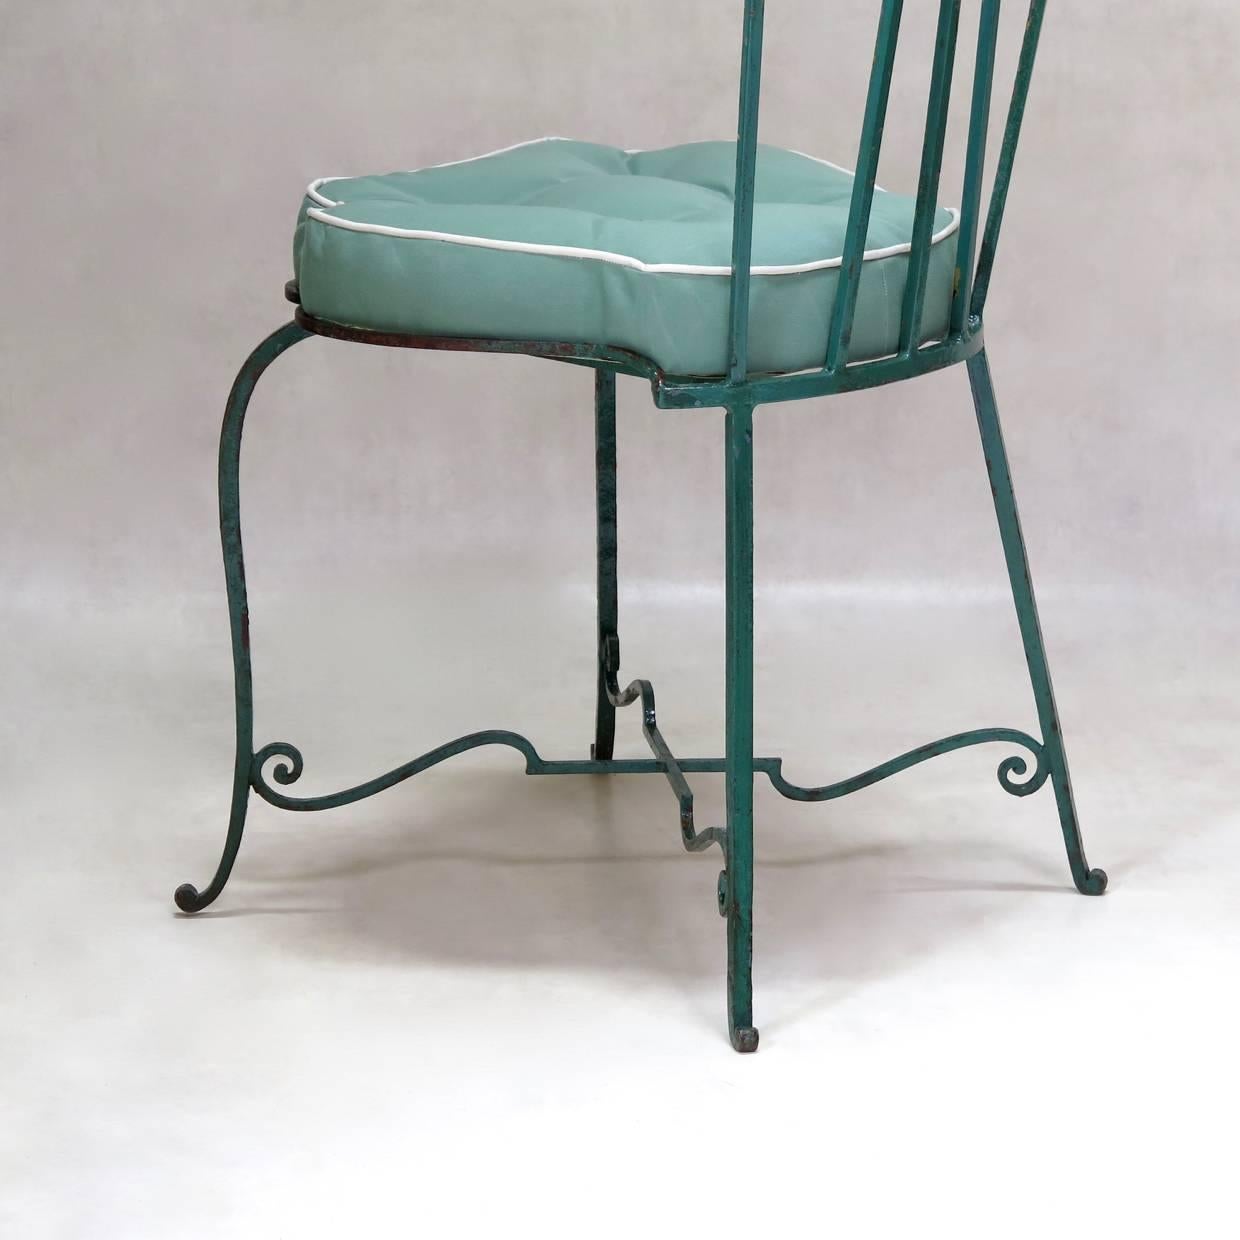 Set of Seven Art Nouveau Iron Chairs with Flower Seats, France, circa 1920s For Sale 4